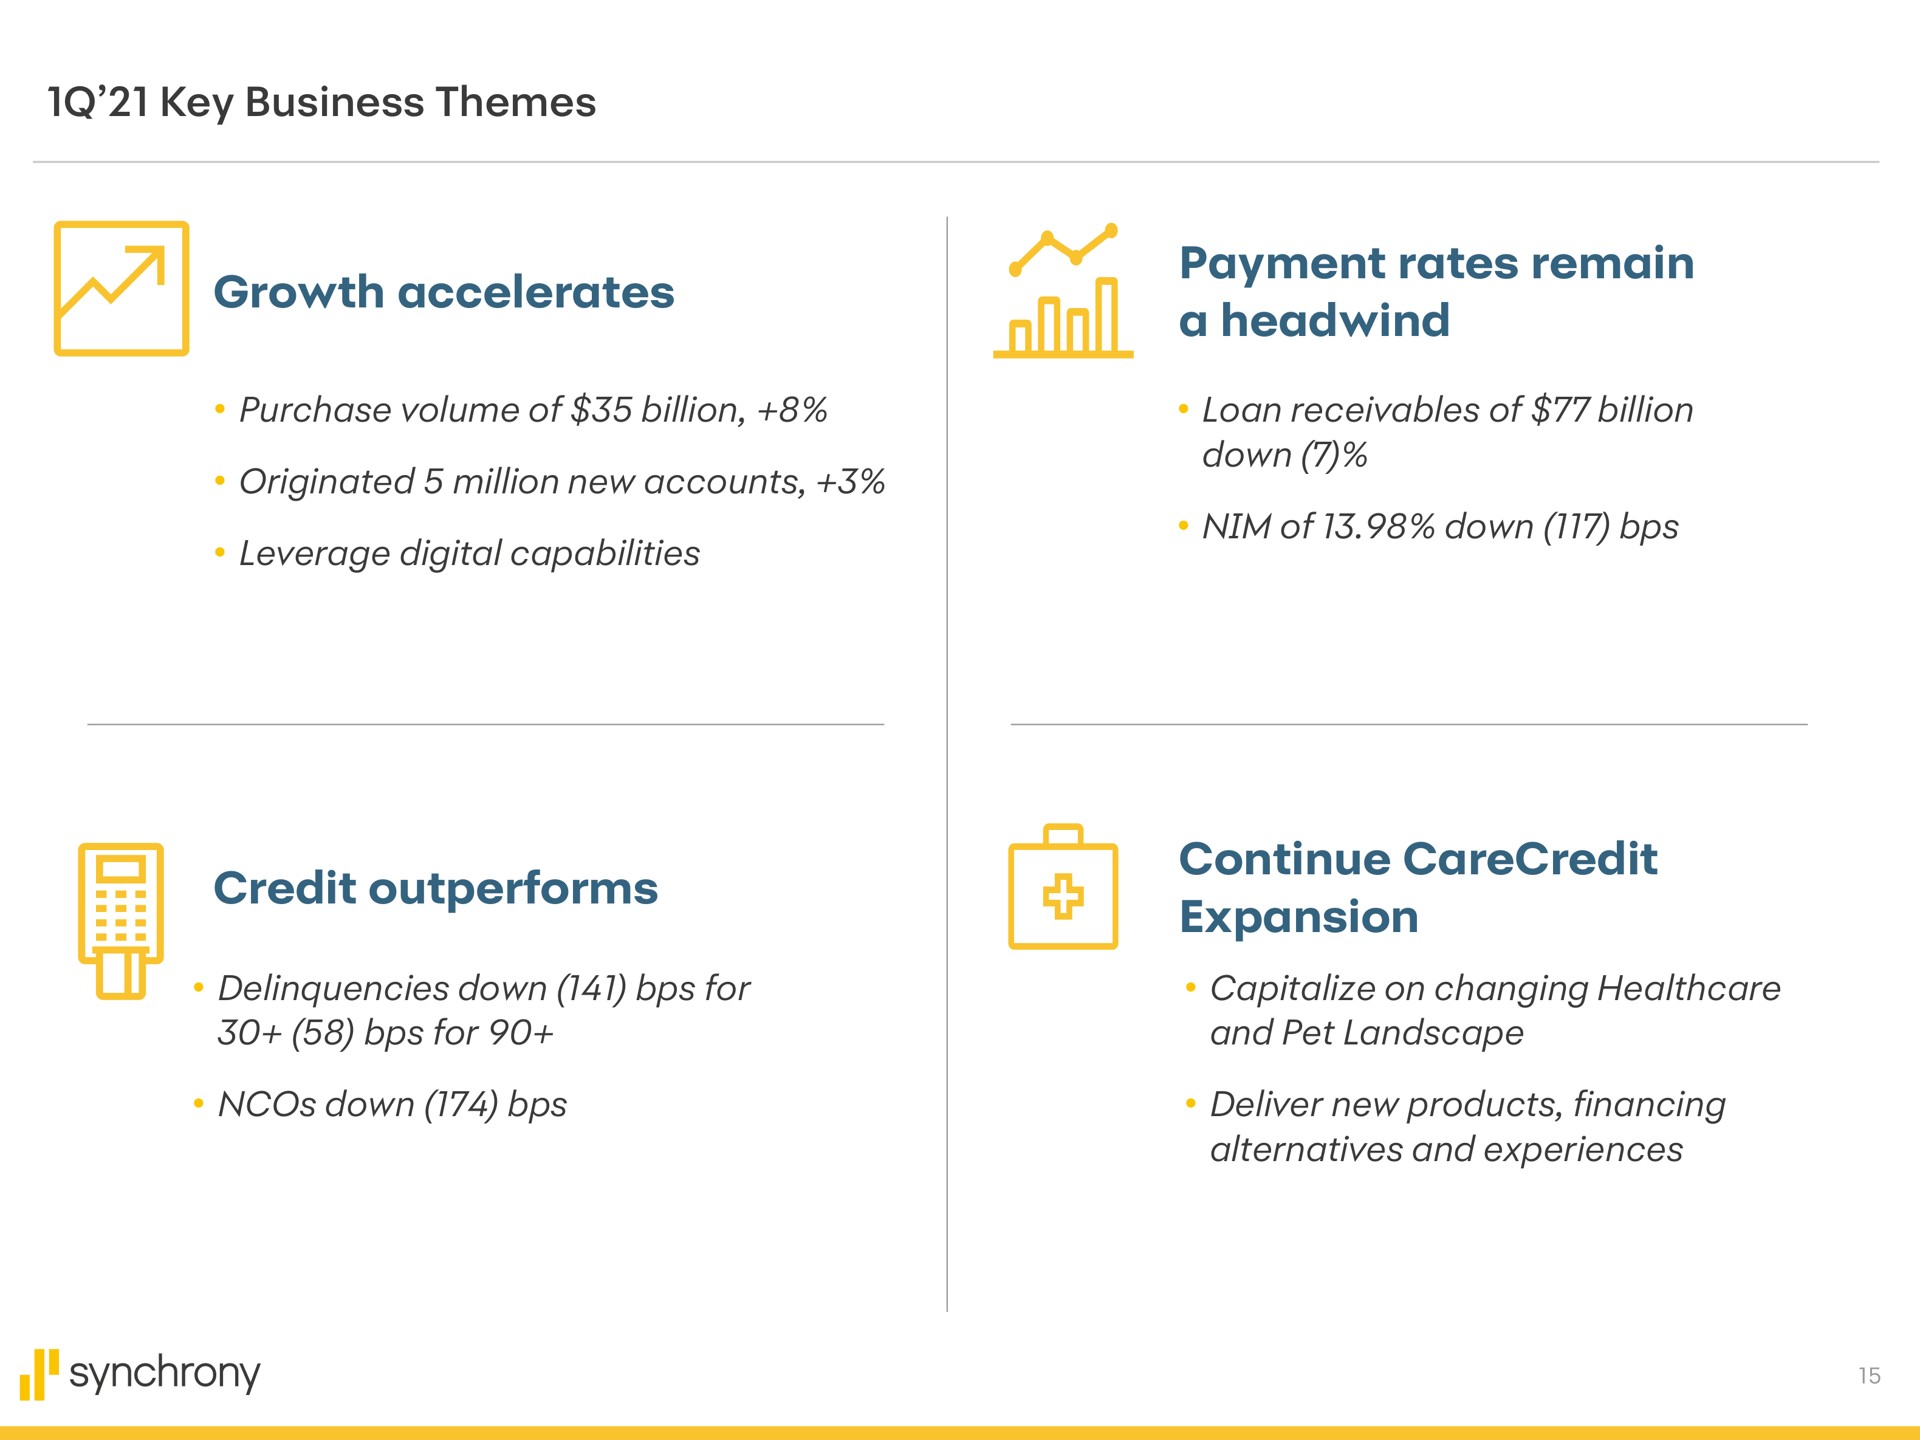 key business themes growth accelerates payment rates remain a purchase volume of billion loan receivables of billion originated million new accounts leverage digital capabilities down nim of down credit outperforms delinquencies down for for down continue expansion capitalize on changing and pet landscape deliver new products financing alternatives and experiences synchrony | Synchrony Financial